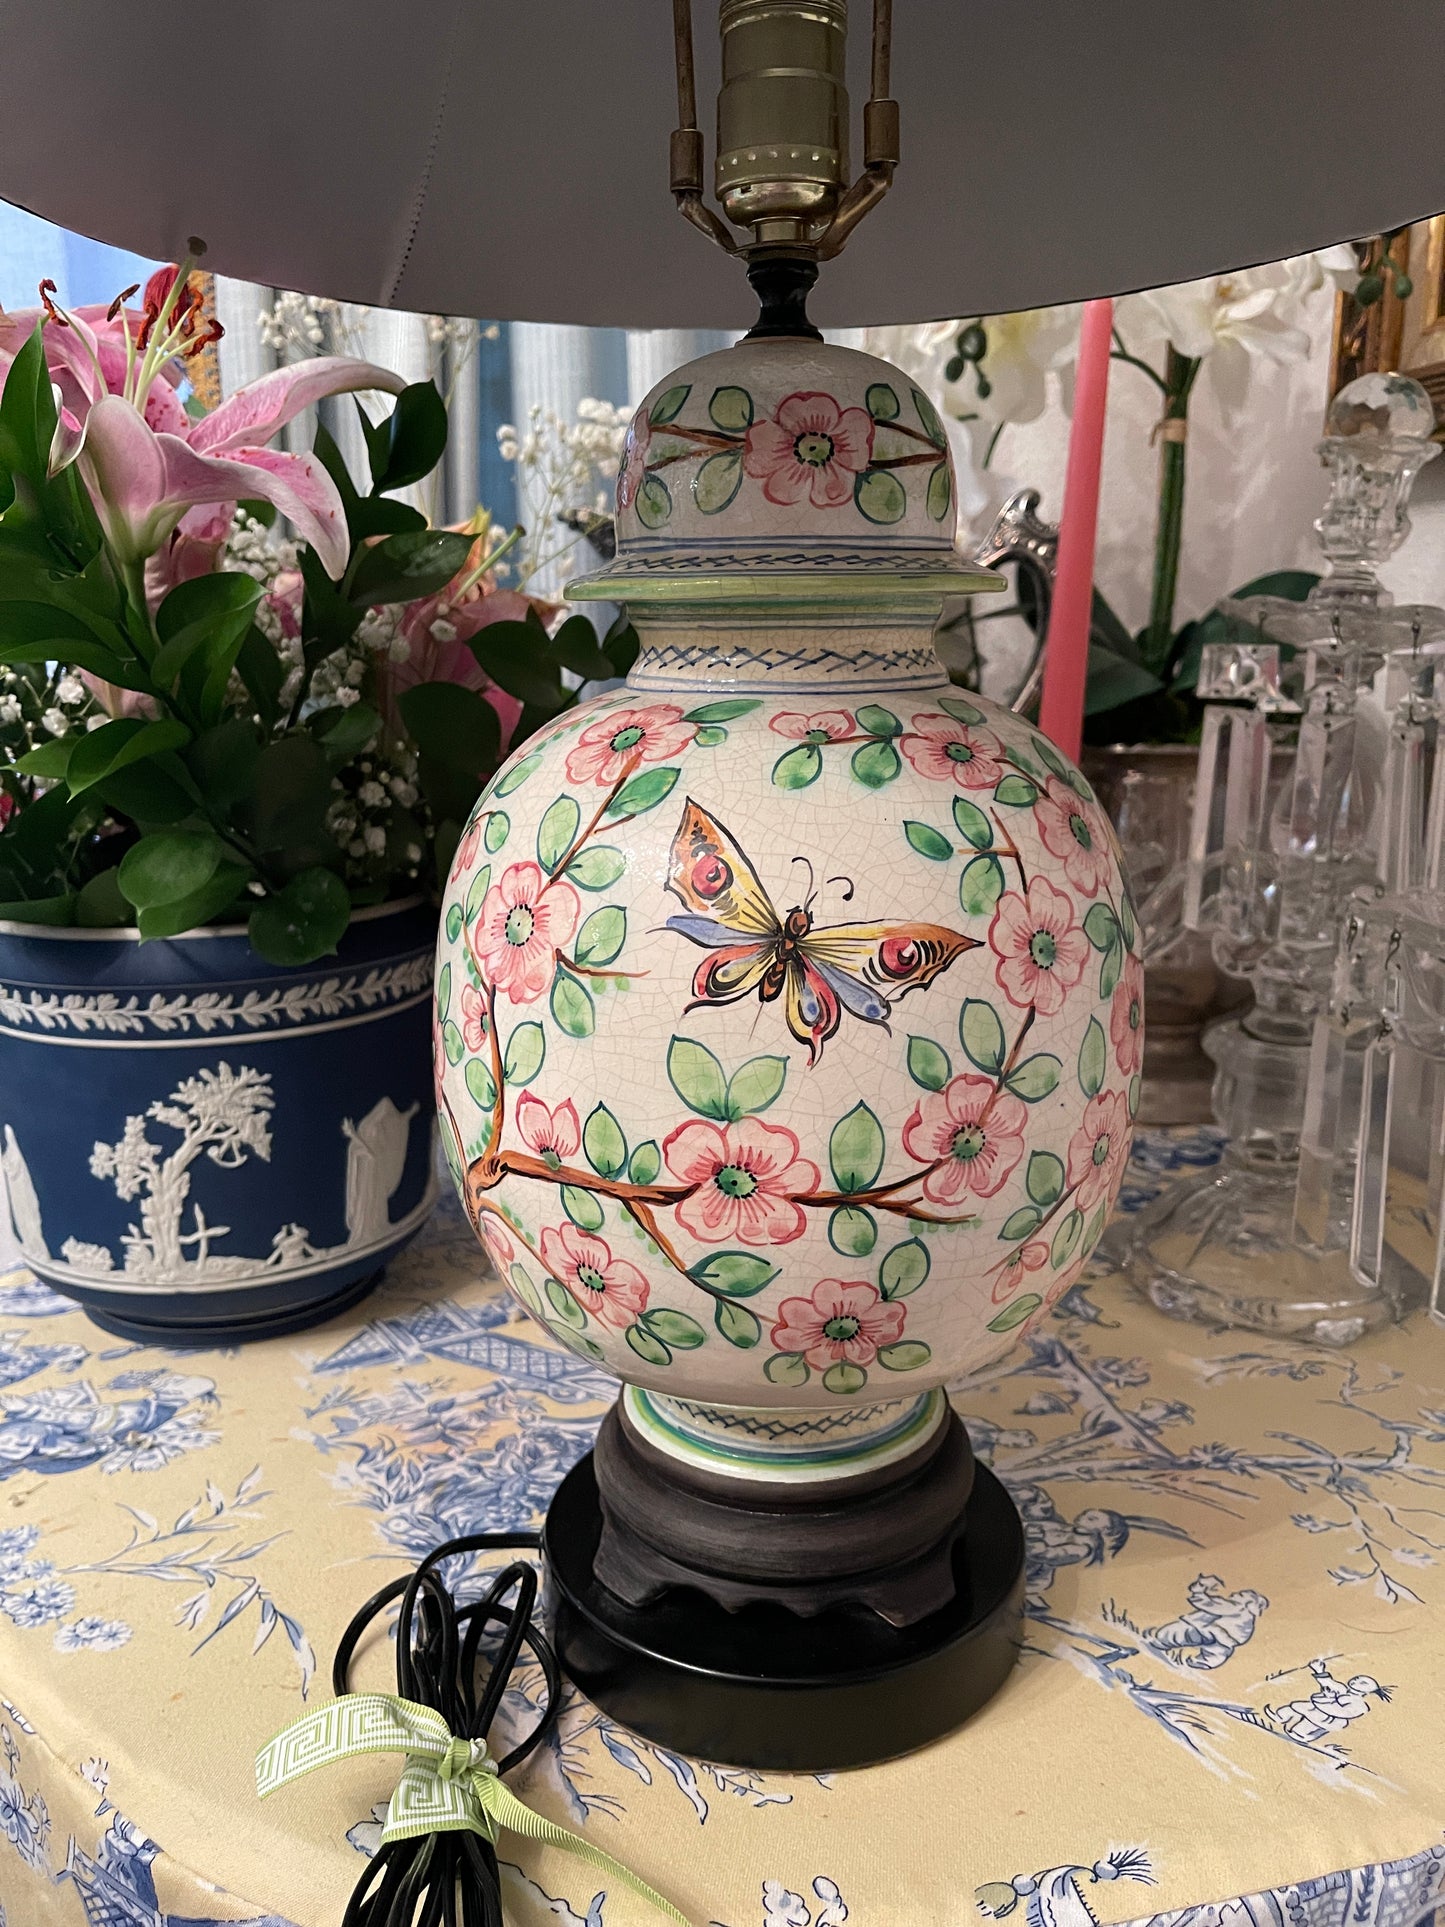 Chinoiserie Ginger Jar Lamp with Birds, Butterflies, and Pink and Green Flowers